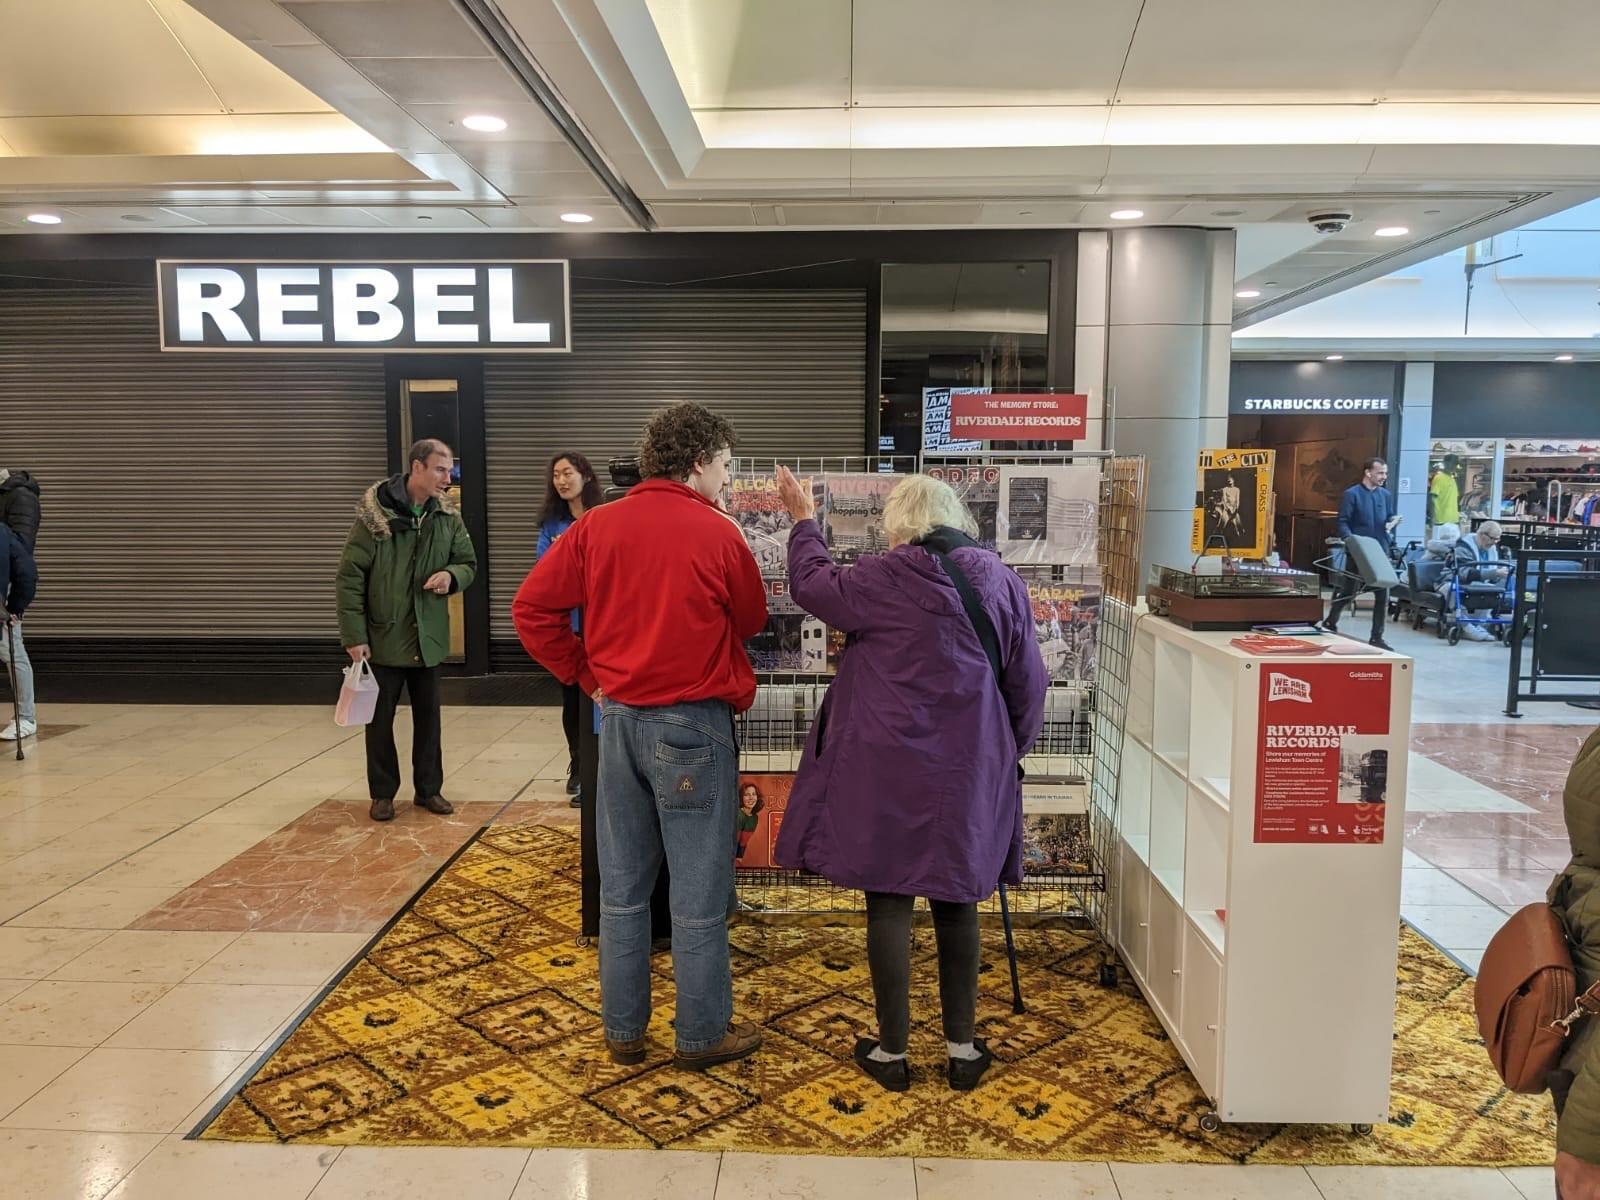 A young man in a red jacket stands to the left of an elderly woman. The pair are looking at and discussing an installation of a record store.